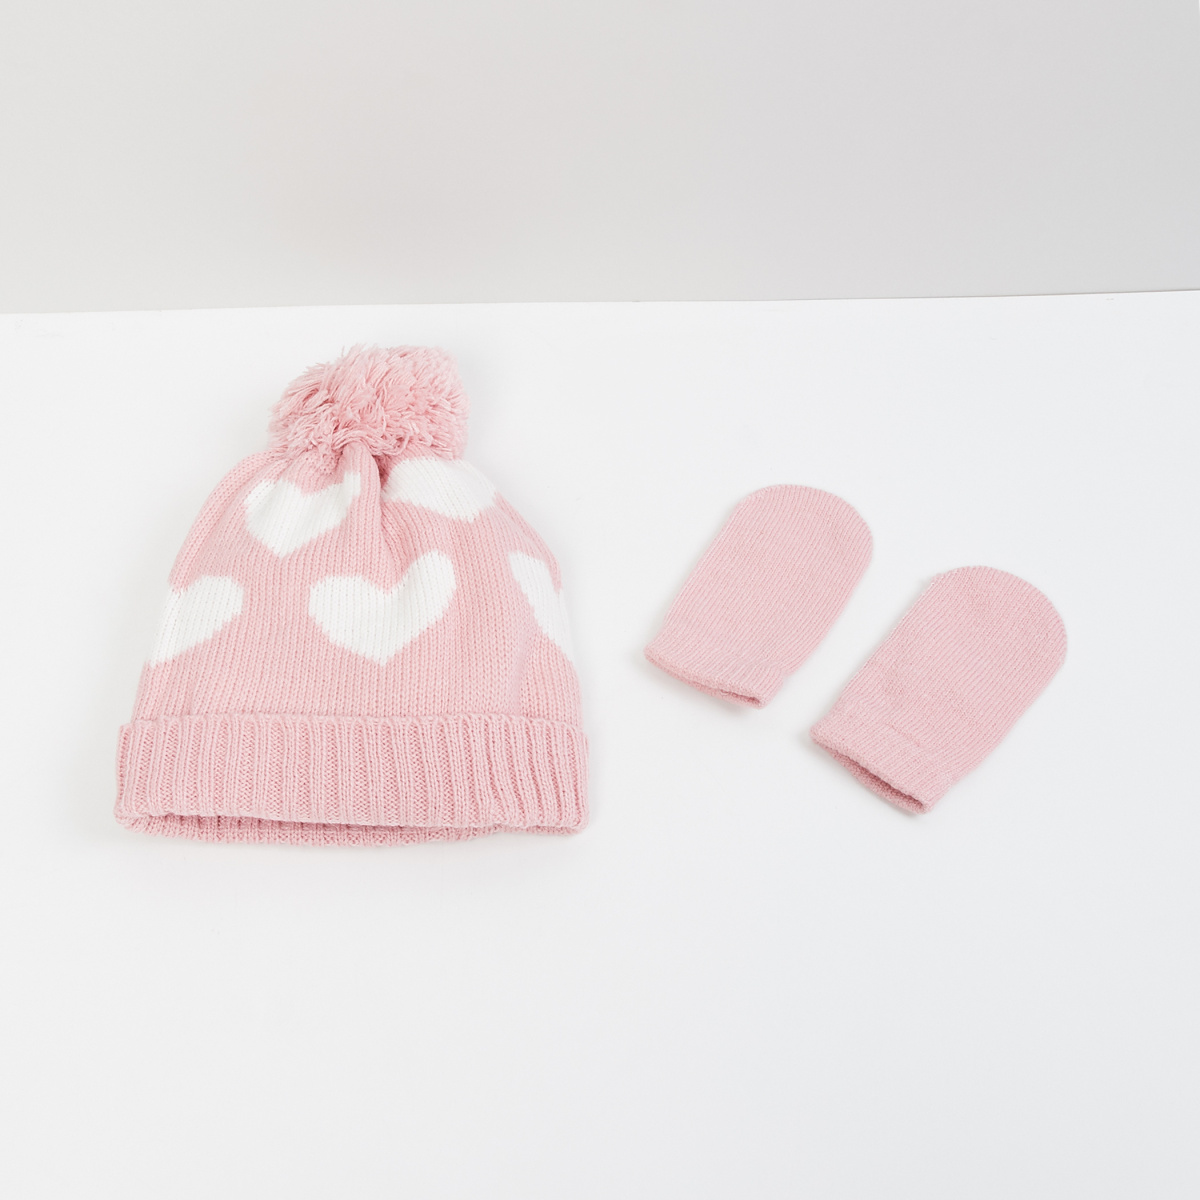 MAX Patterned Knit Beanie with Mittens